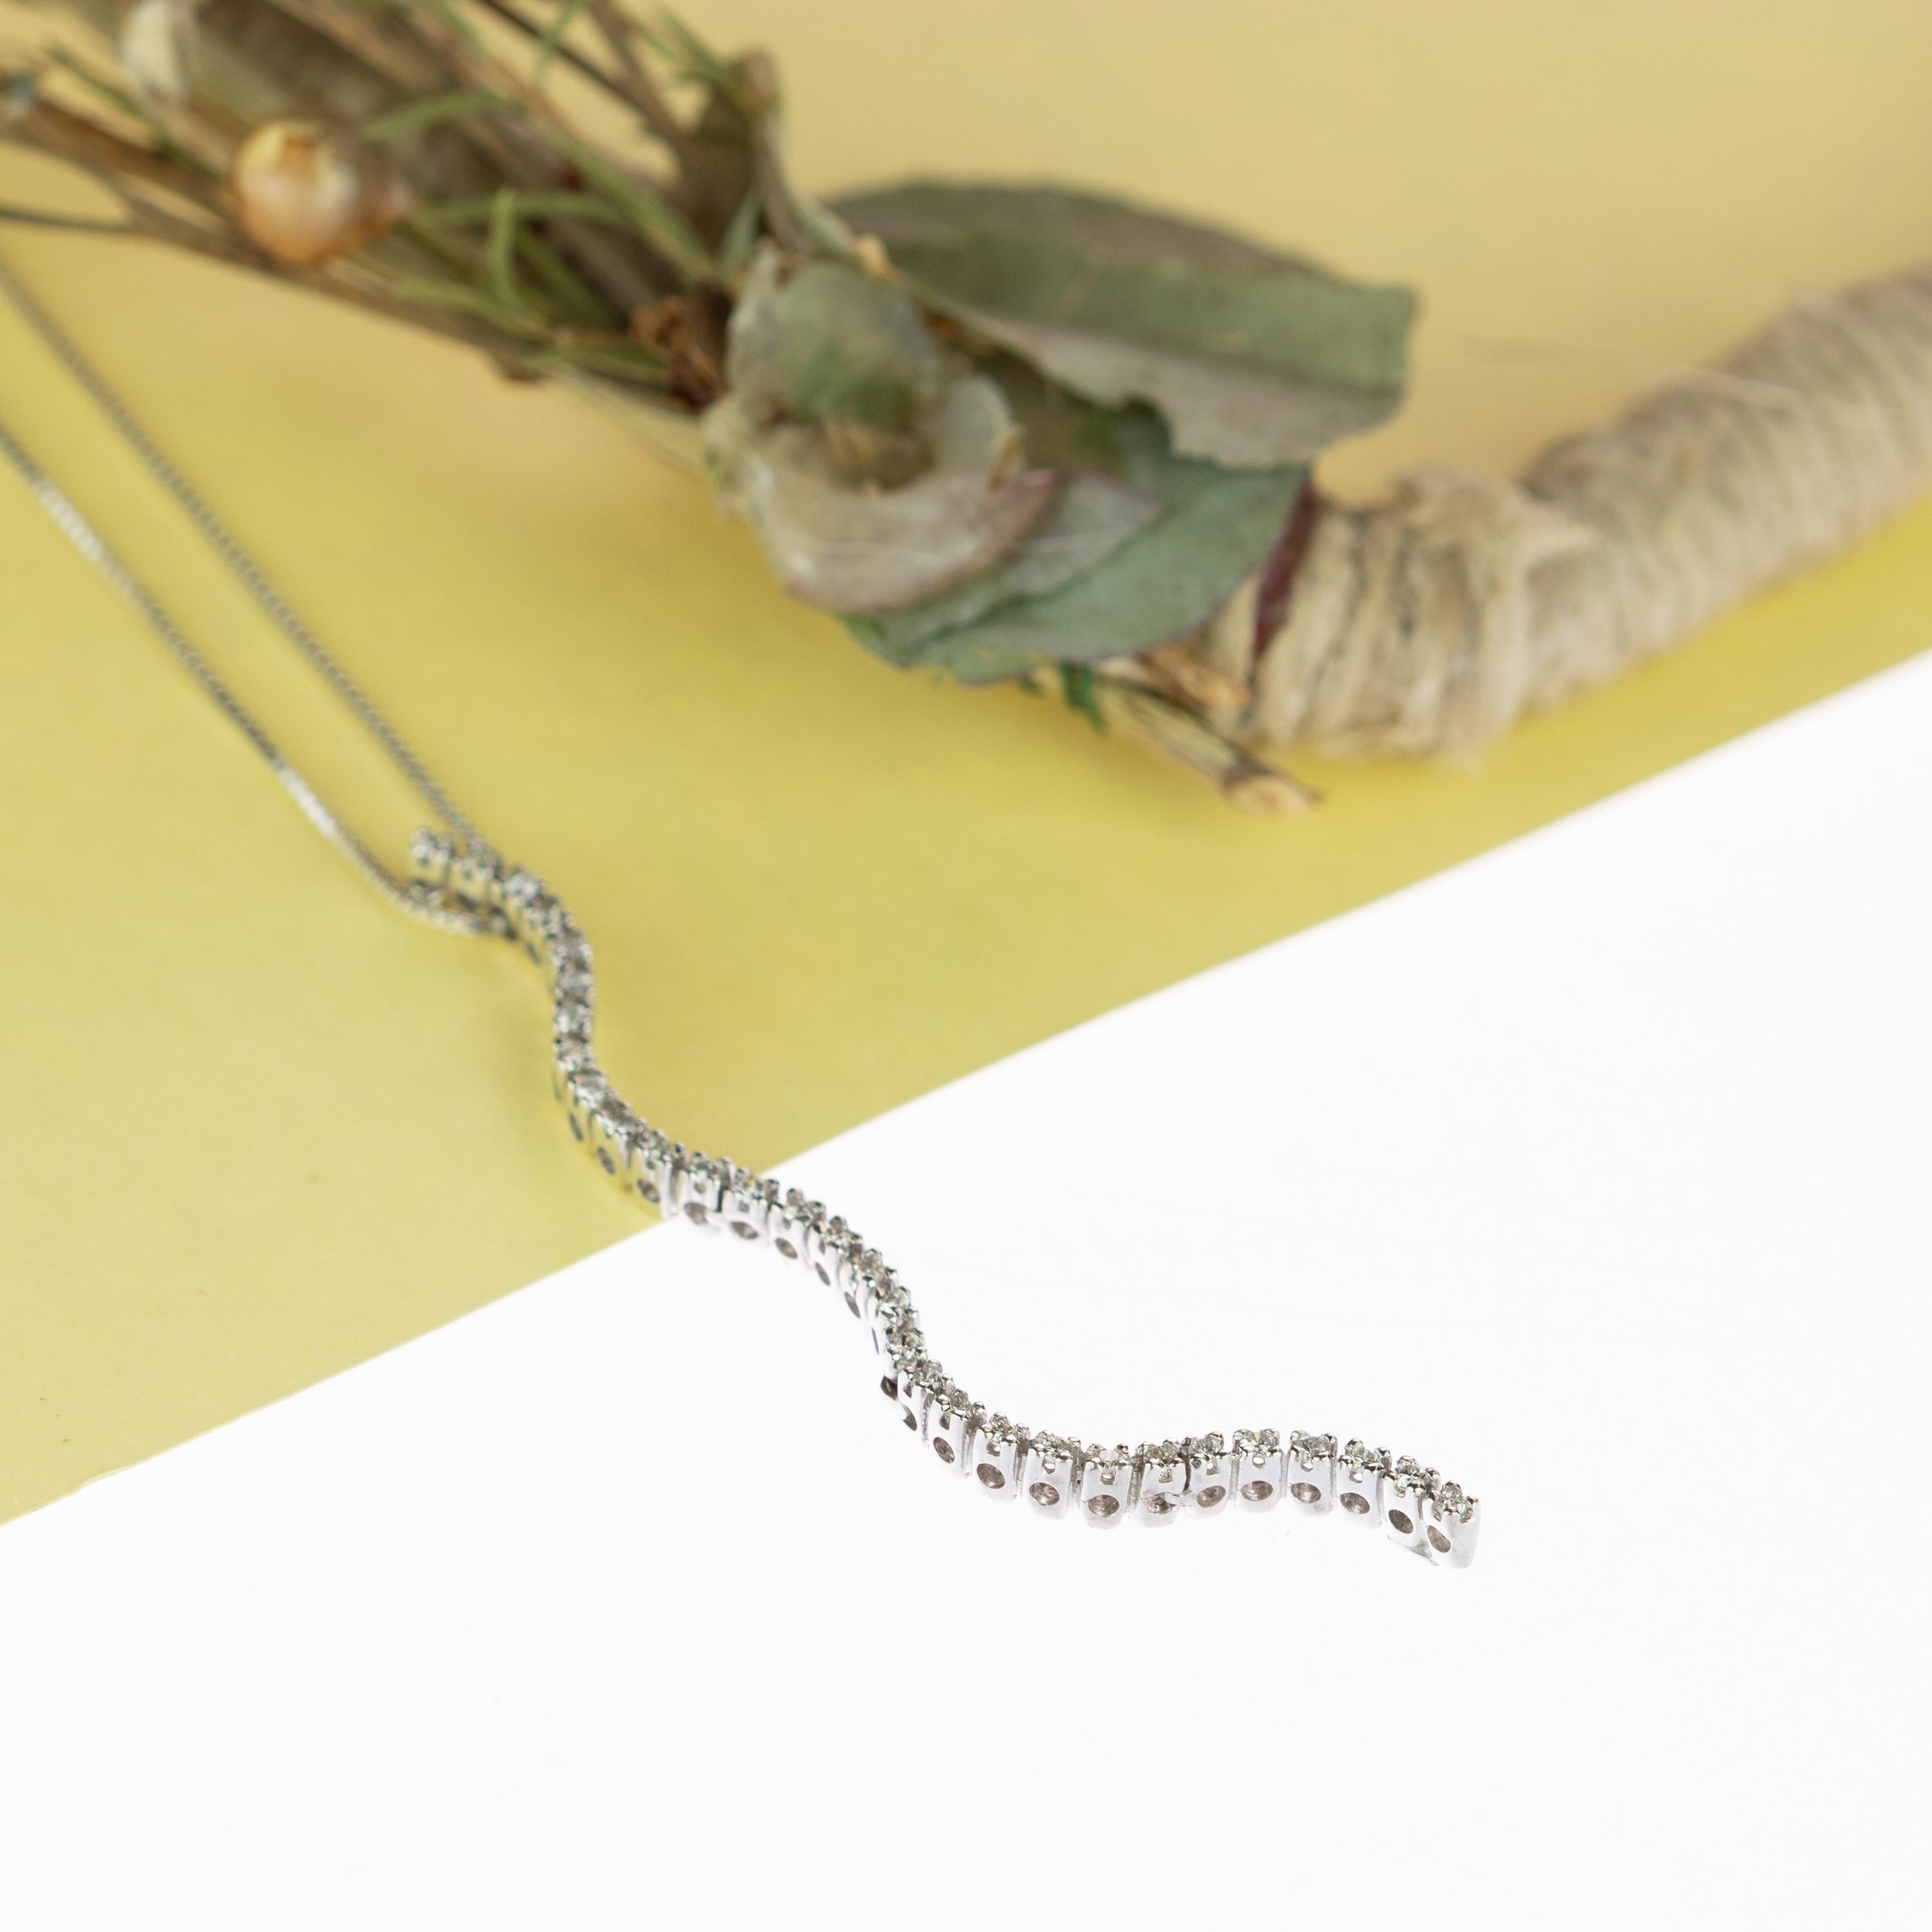 Stunning and marvelous curved vertical bar diamond pendant embellished with a delicate 41.5 cm 18k white gold chain. A total of 0.32 carat diamonds create a snake / serpent shape of gems to decorate a clear chest and give a fancy, clean and luxury